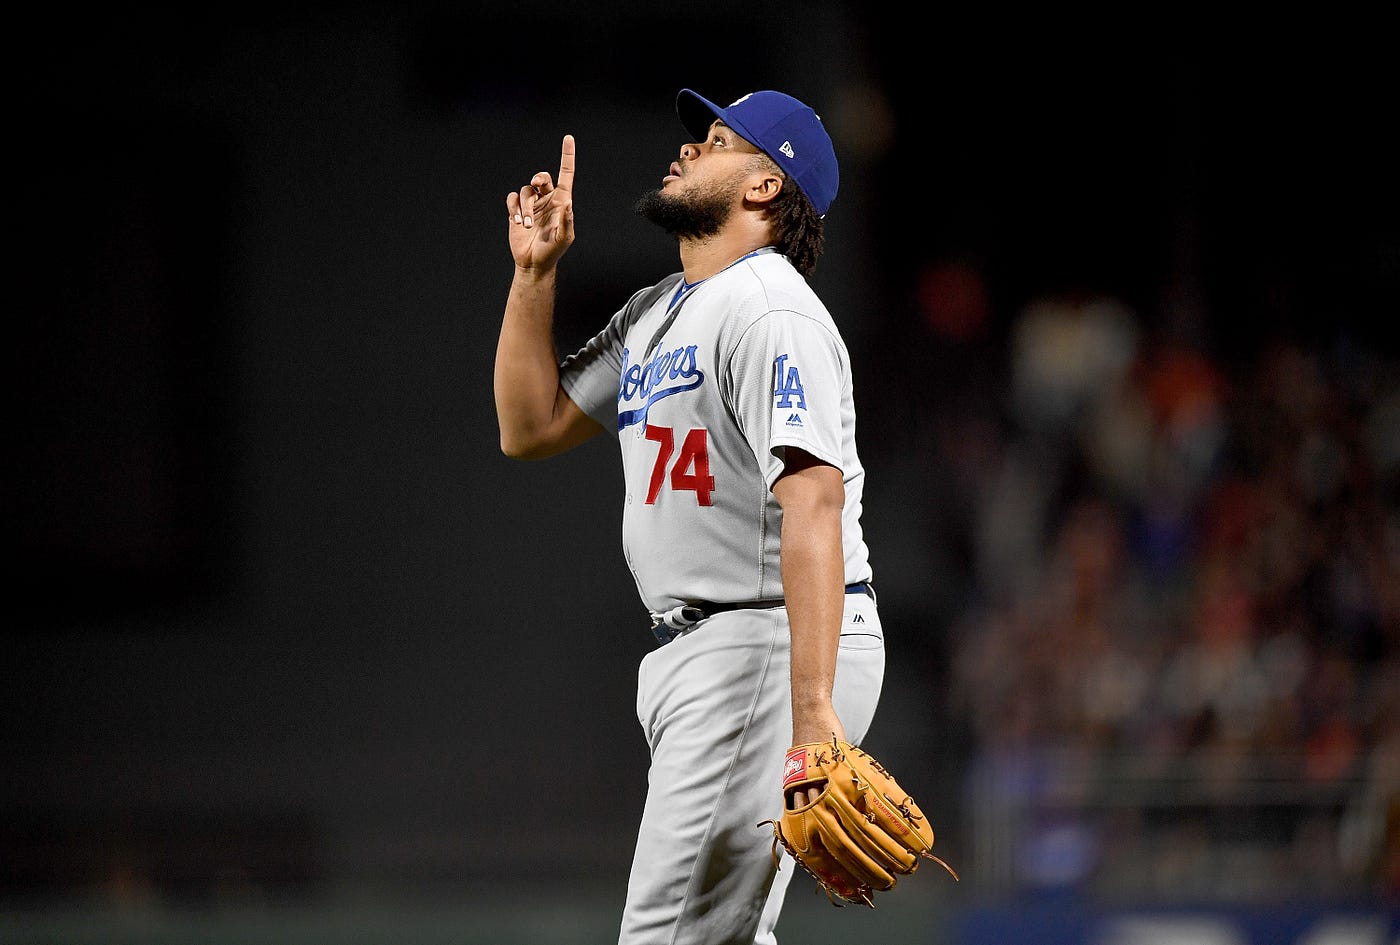 Kenley Jansen makes 2015 debut, strikes out four batters in one inning